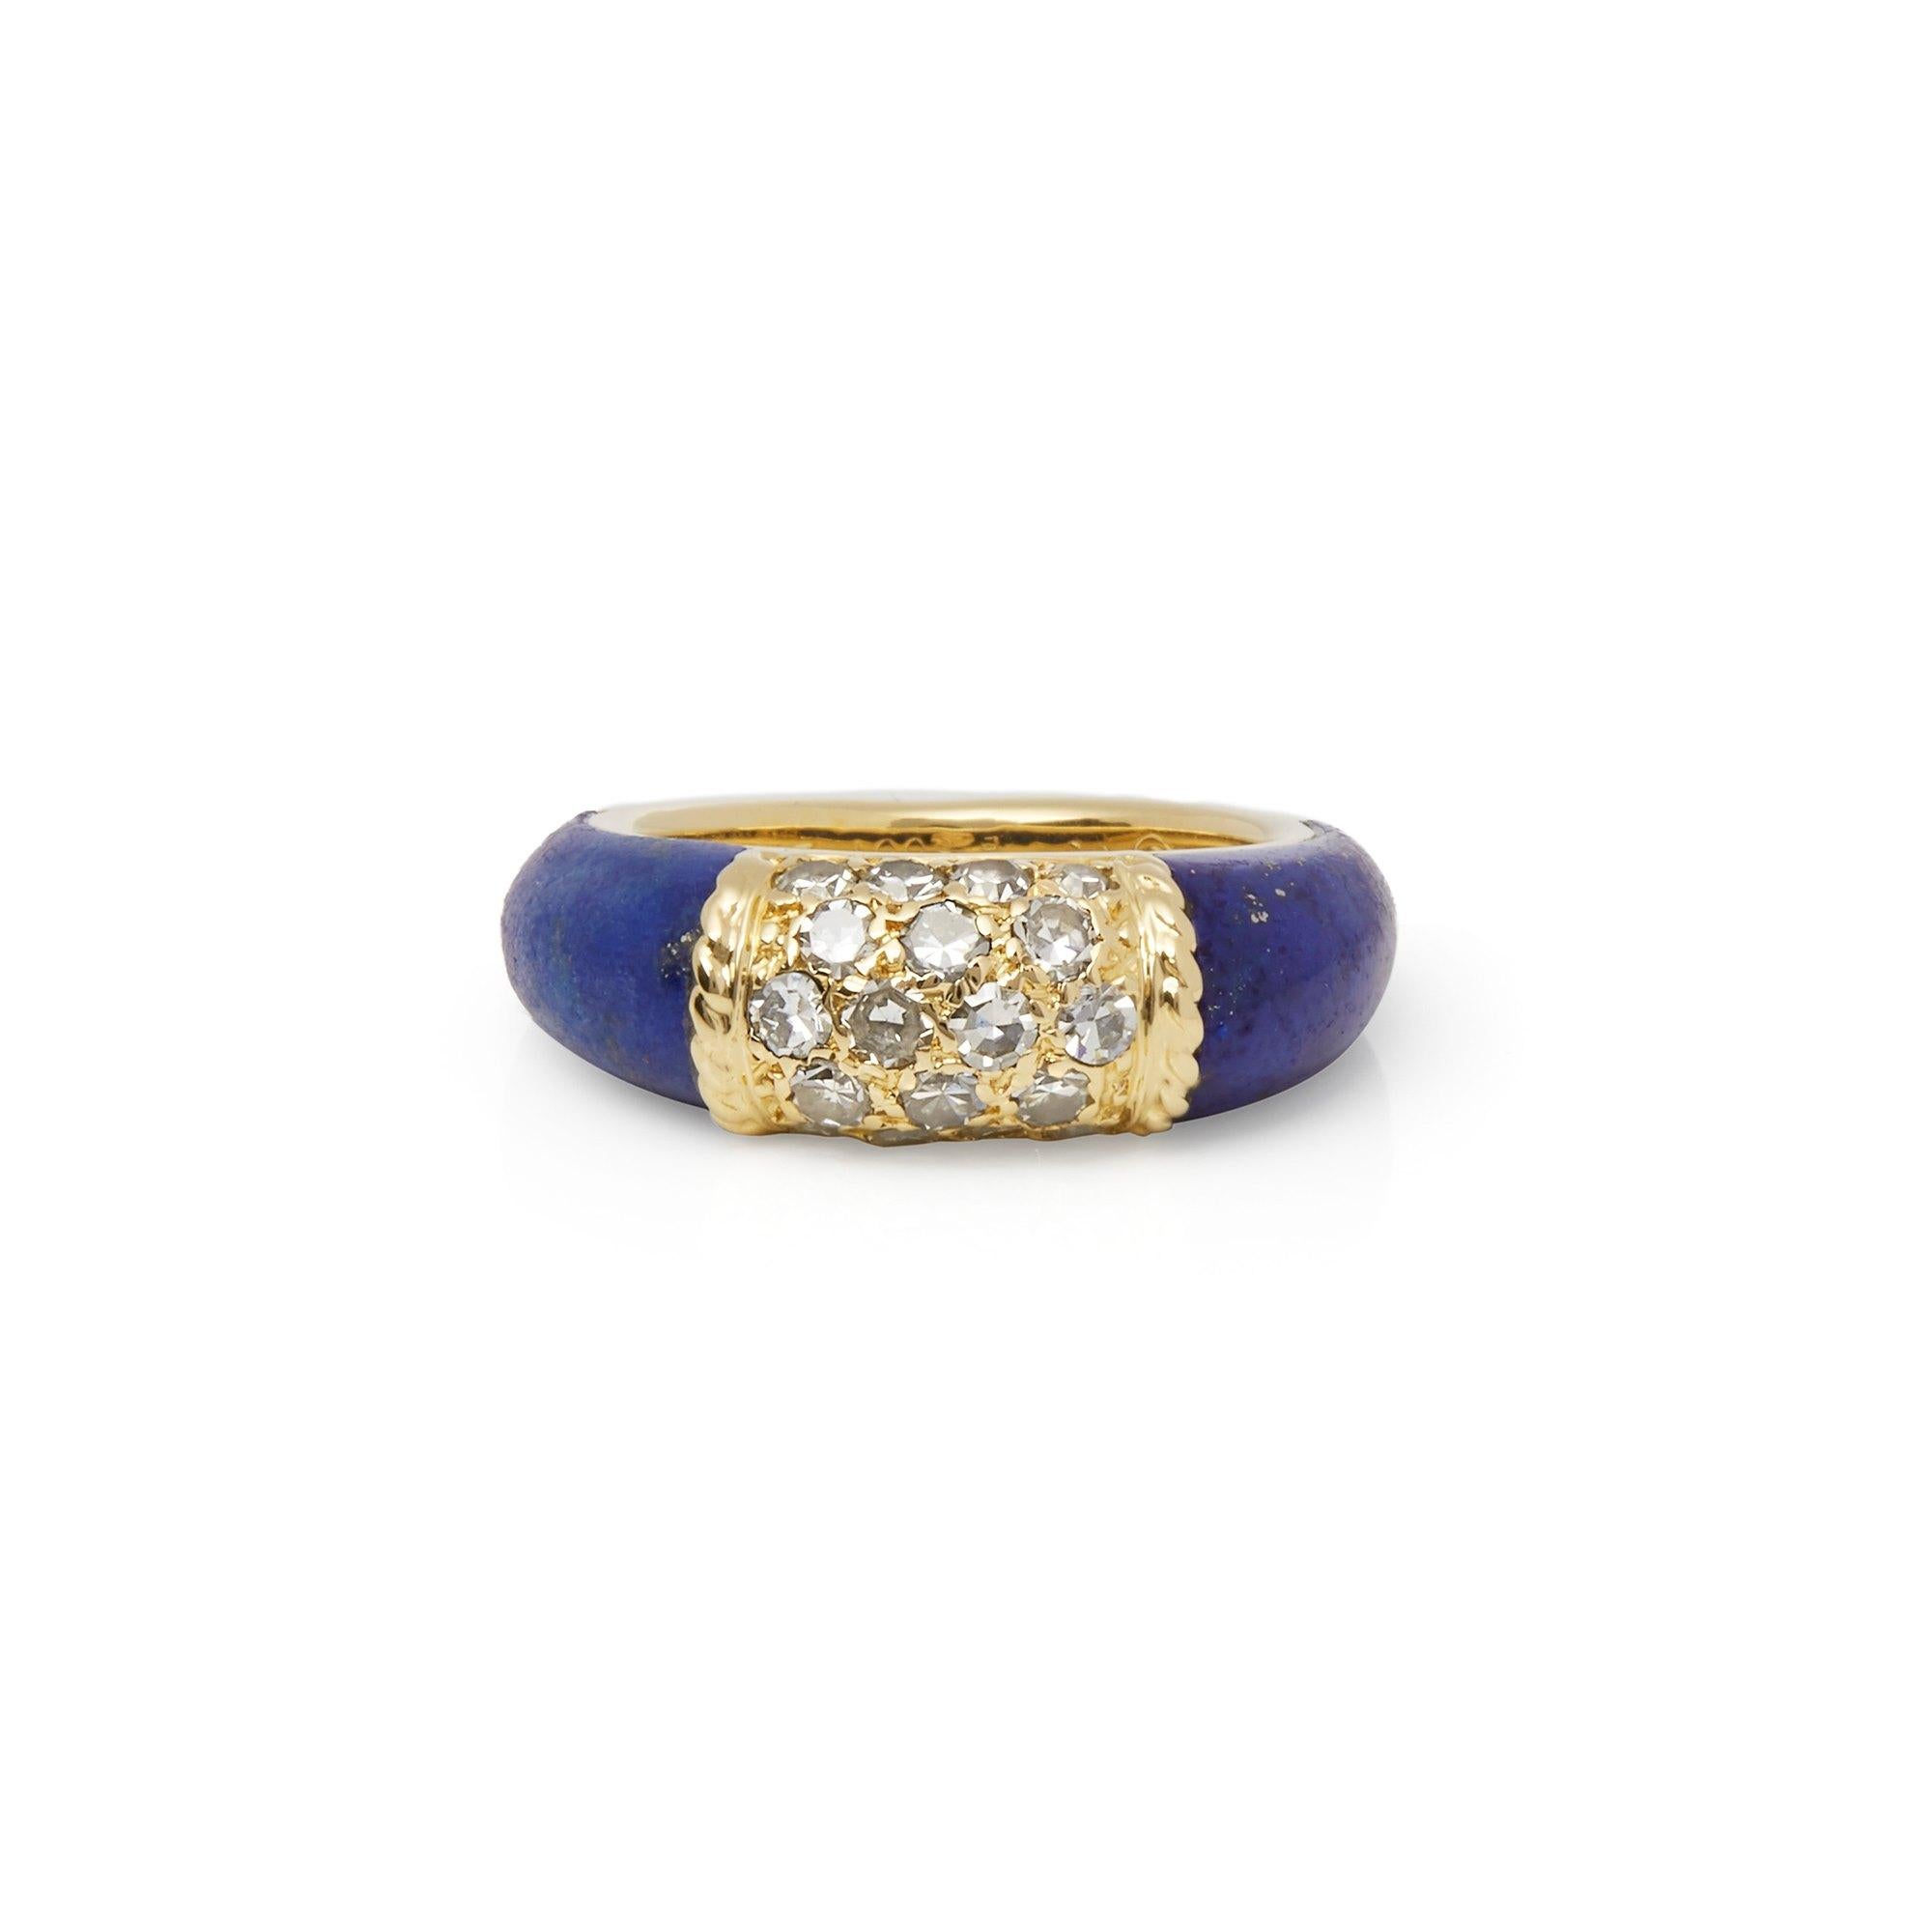 Van Cleef & Arpels Lapis And Diamond 18ct Yellow Gold Philippine Ring

Brand- Van Cleef & Arpels
Model- Philippine Ring
Product Type- Ring
Serial Number- B5***
Material(s)- 18ct Yellow Gold
Gemstone- Diamond
UK Ring Size- I
EU Ring Size- 48
US Ring